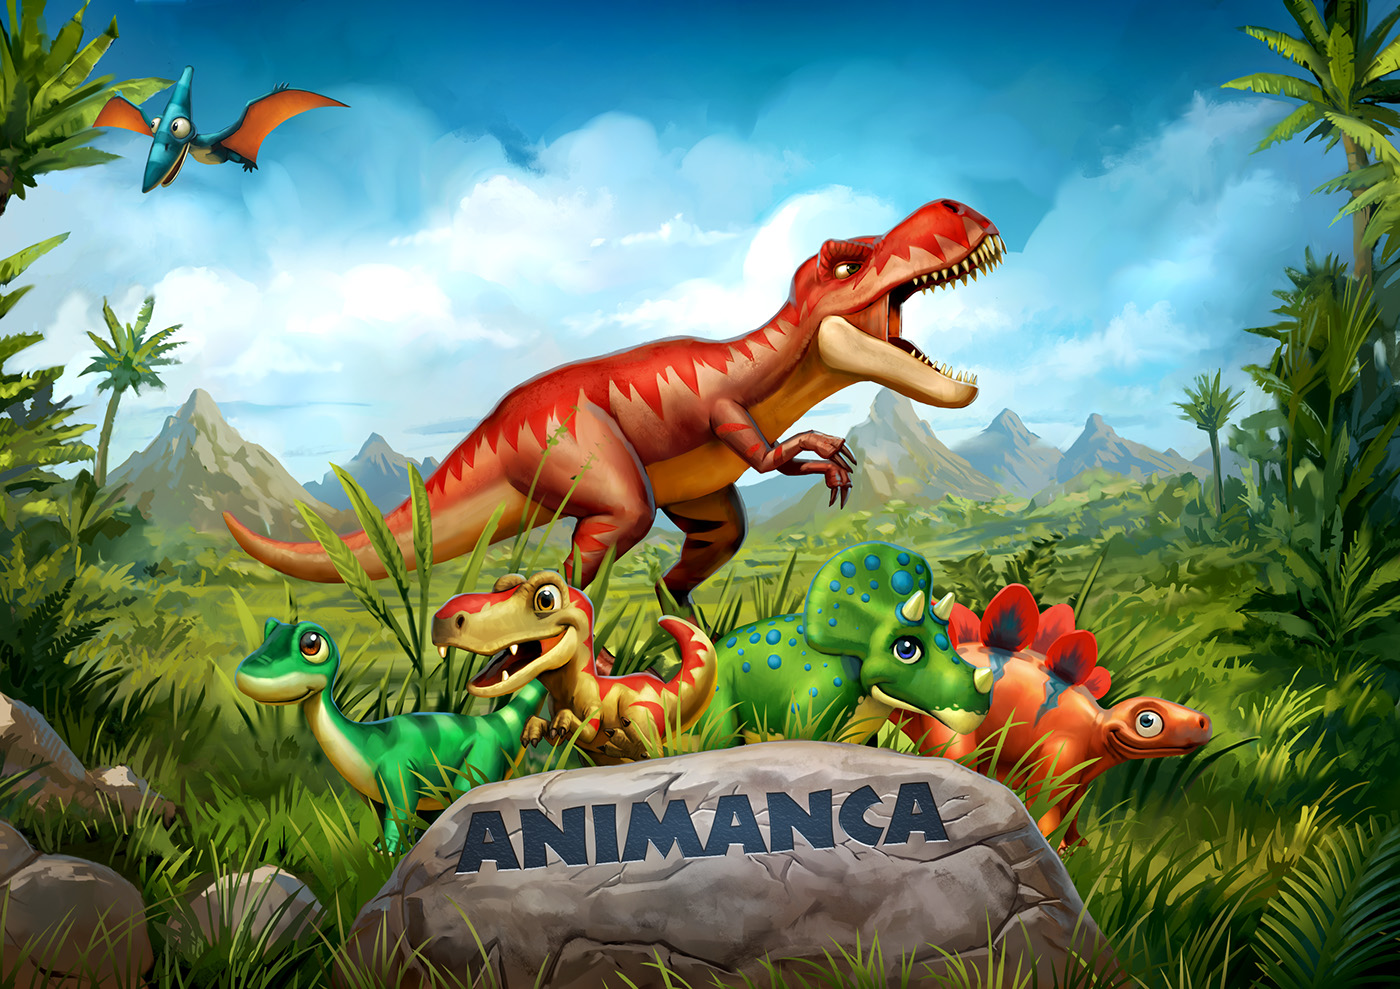 Discover The World of Dinos - www.animanca.ch.